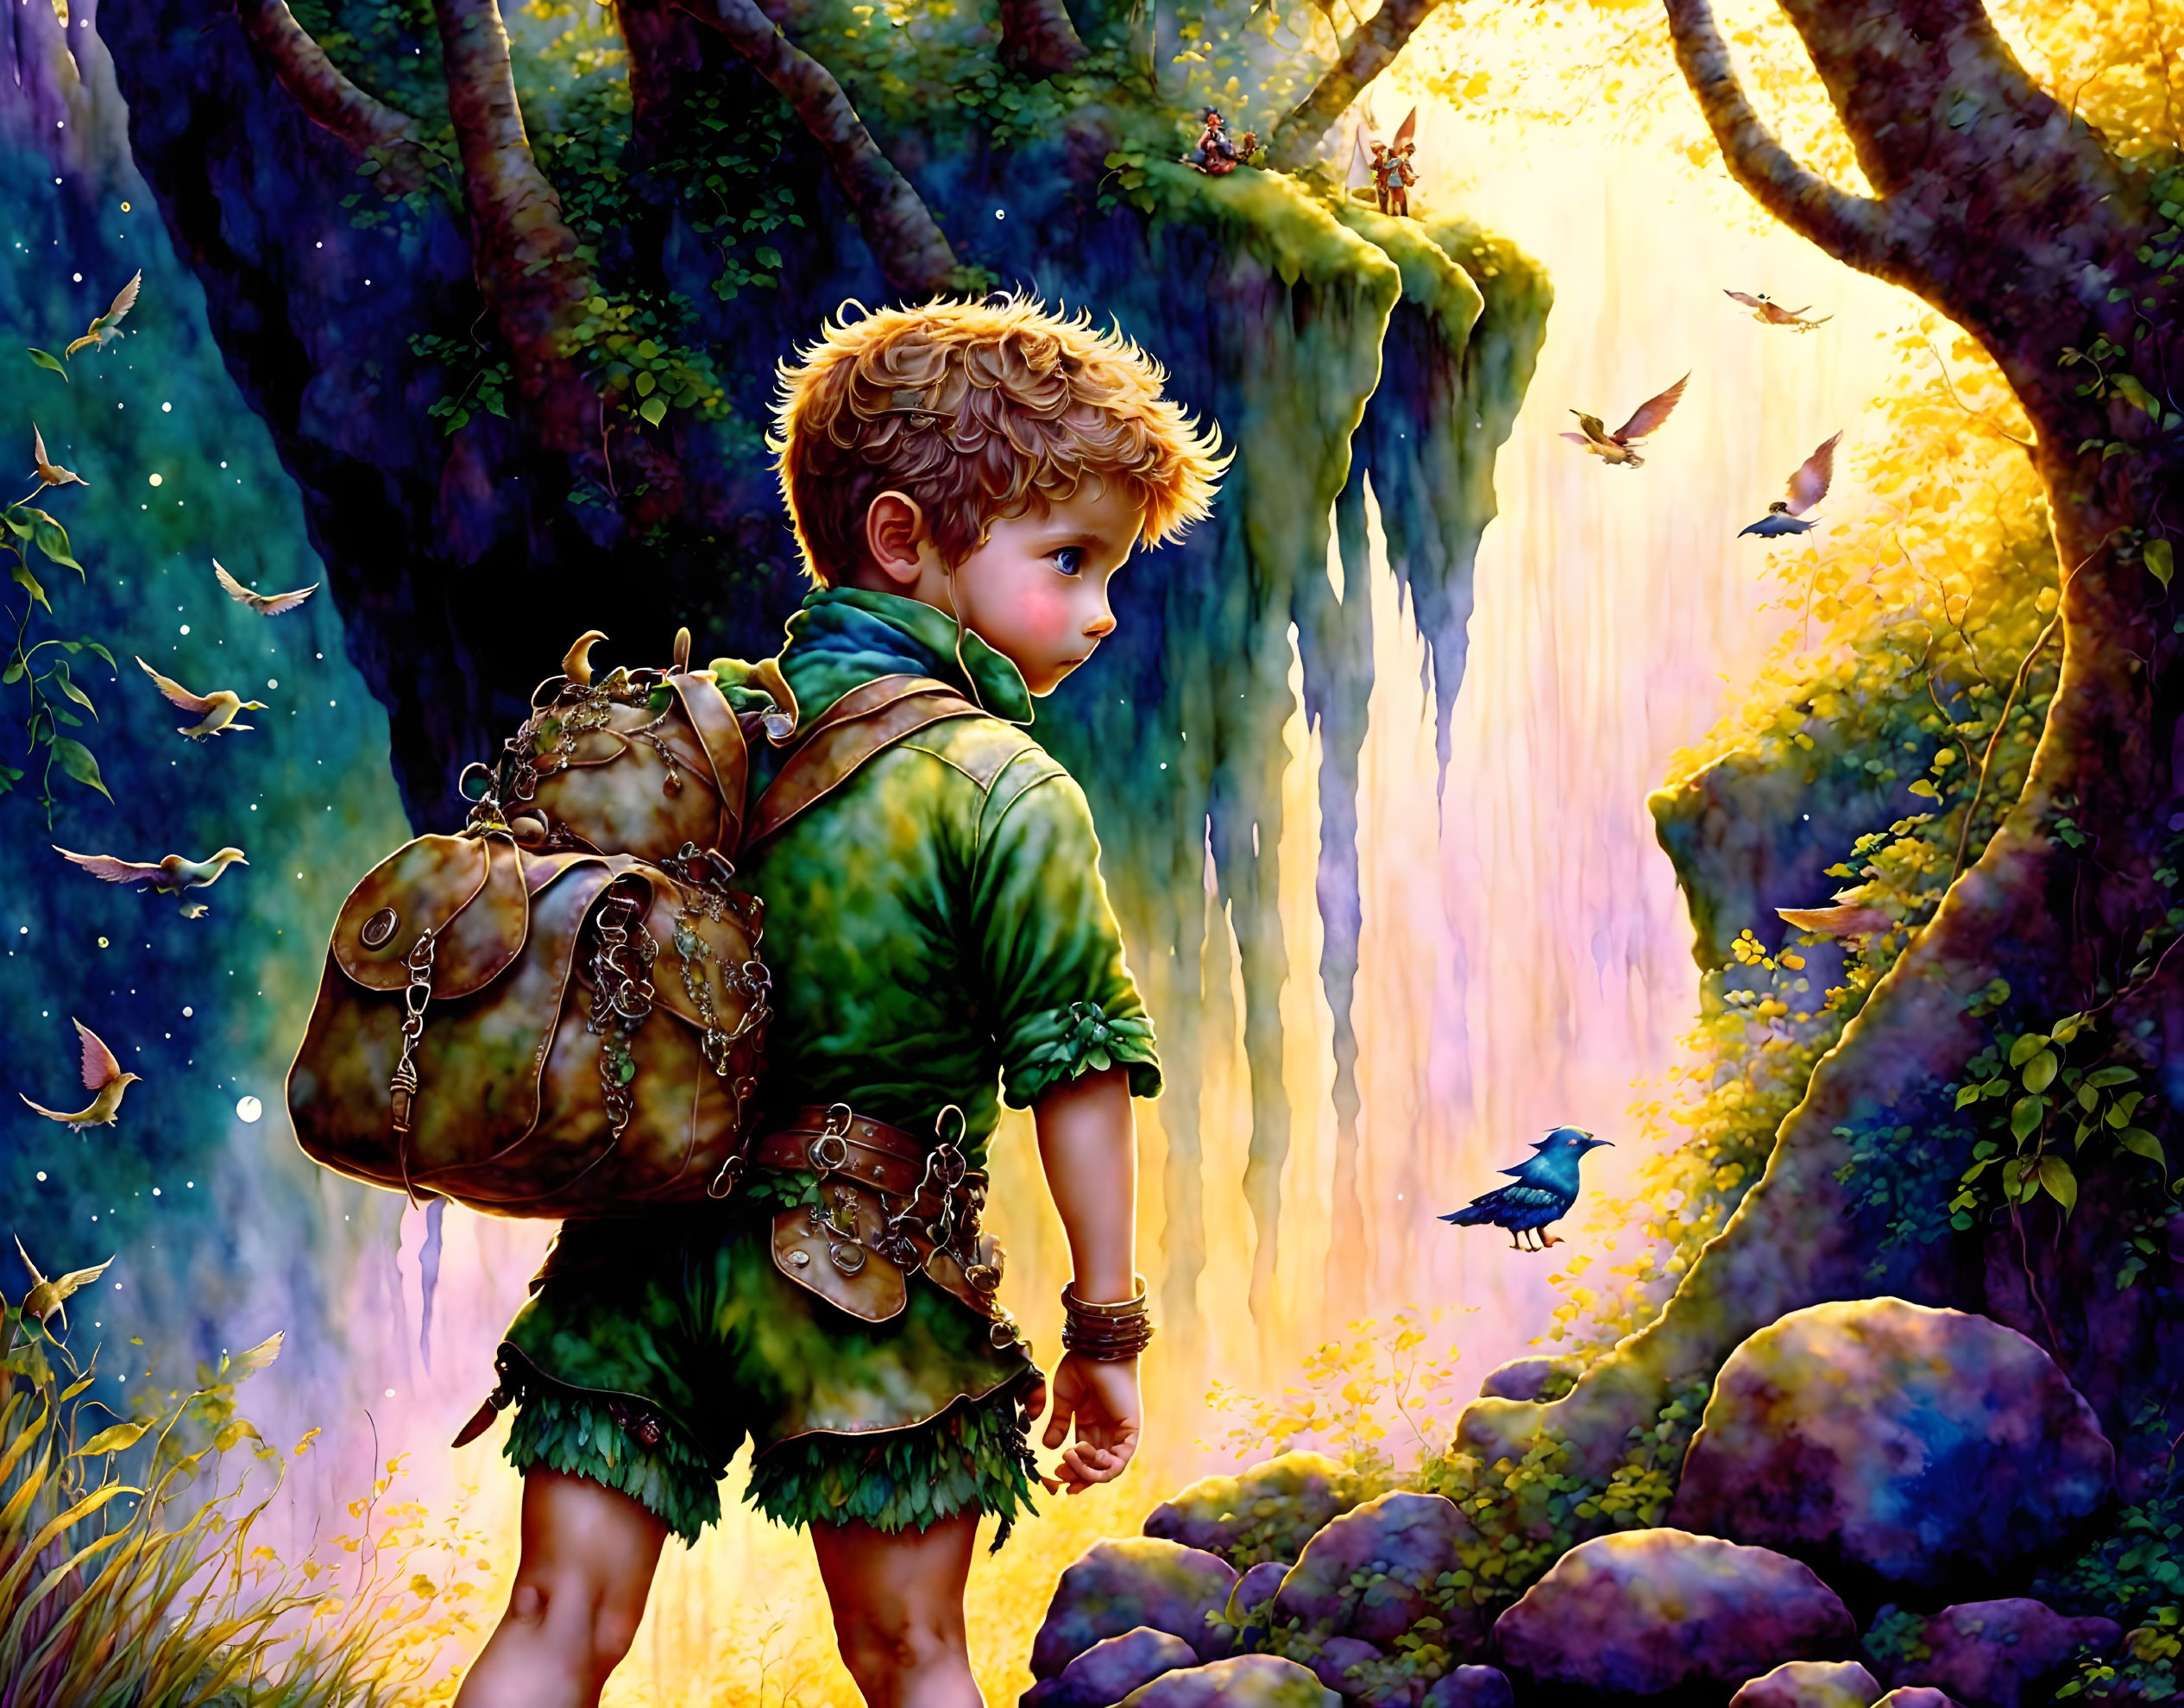 A Neverland 'Lost Boy' 